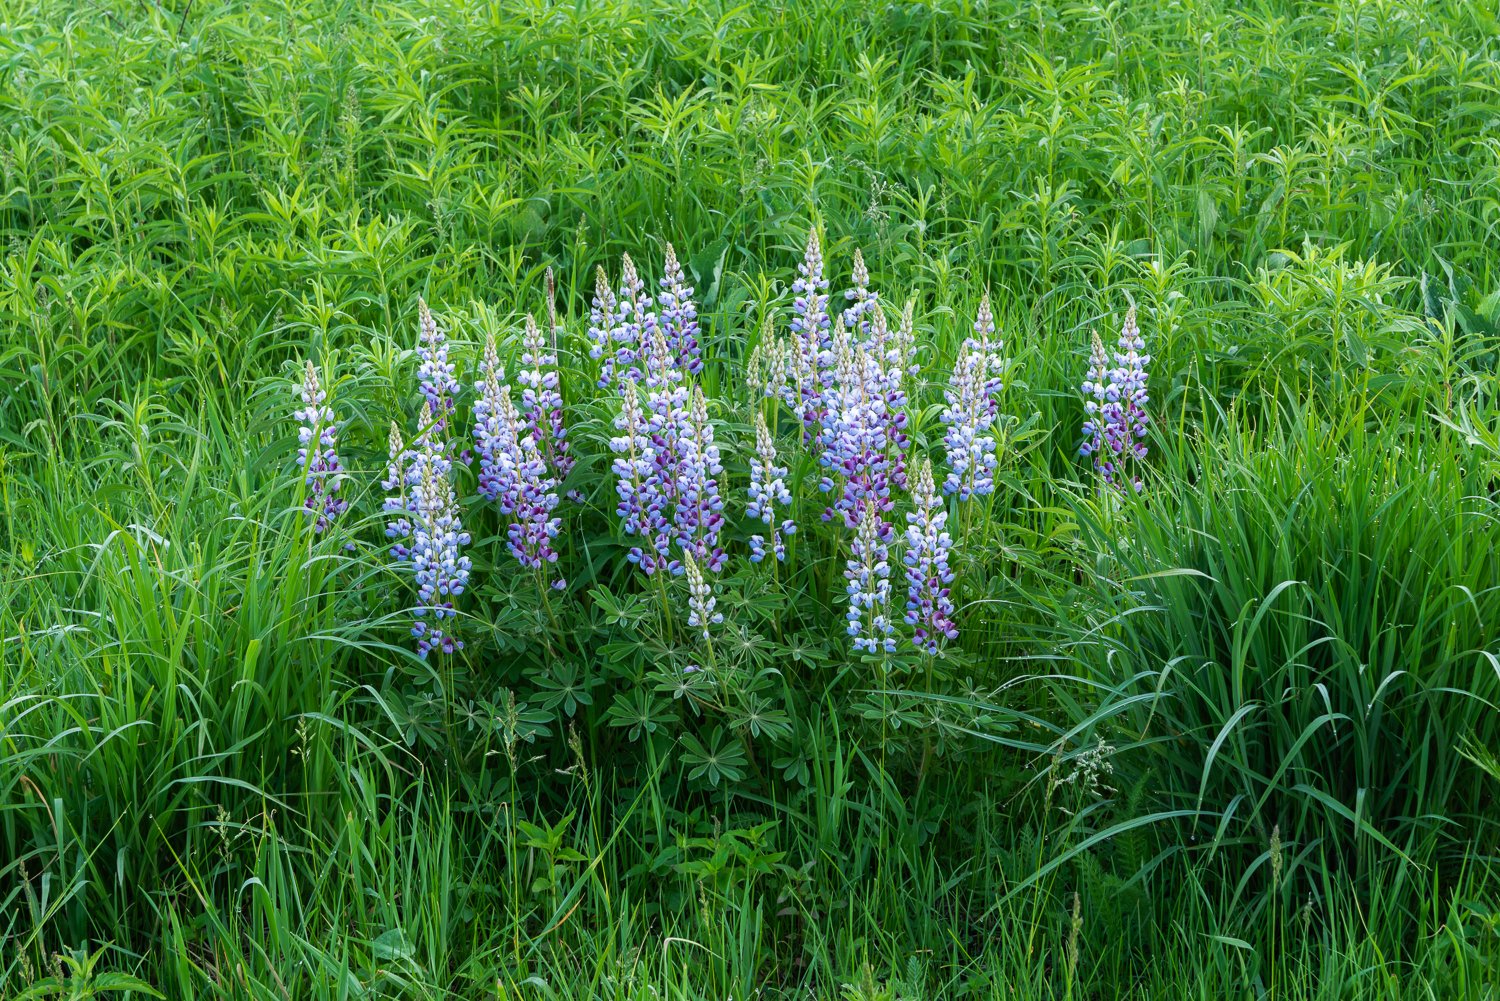 Wild lupine in bloom